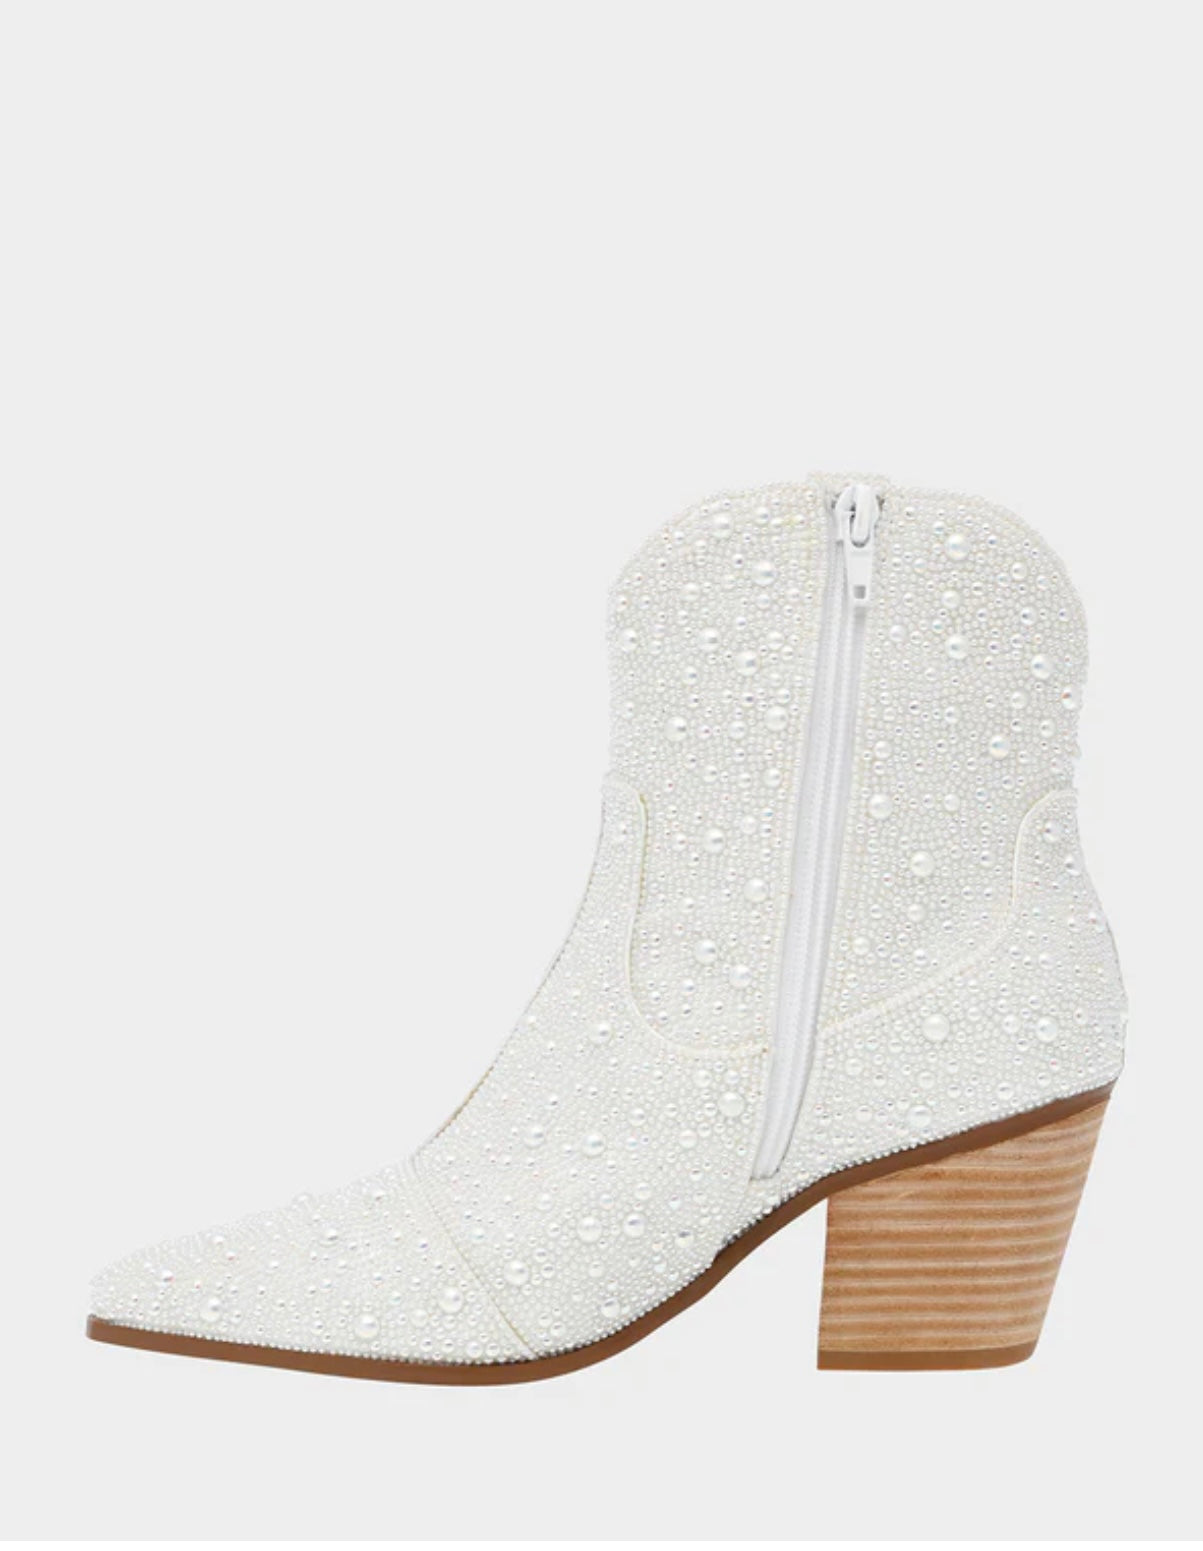 Betsy Johnson Pearl Booties